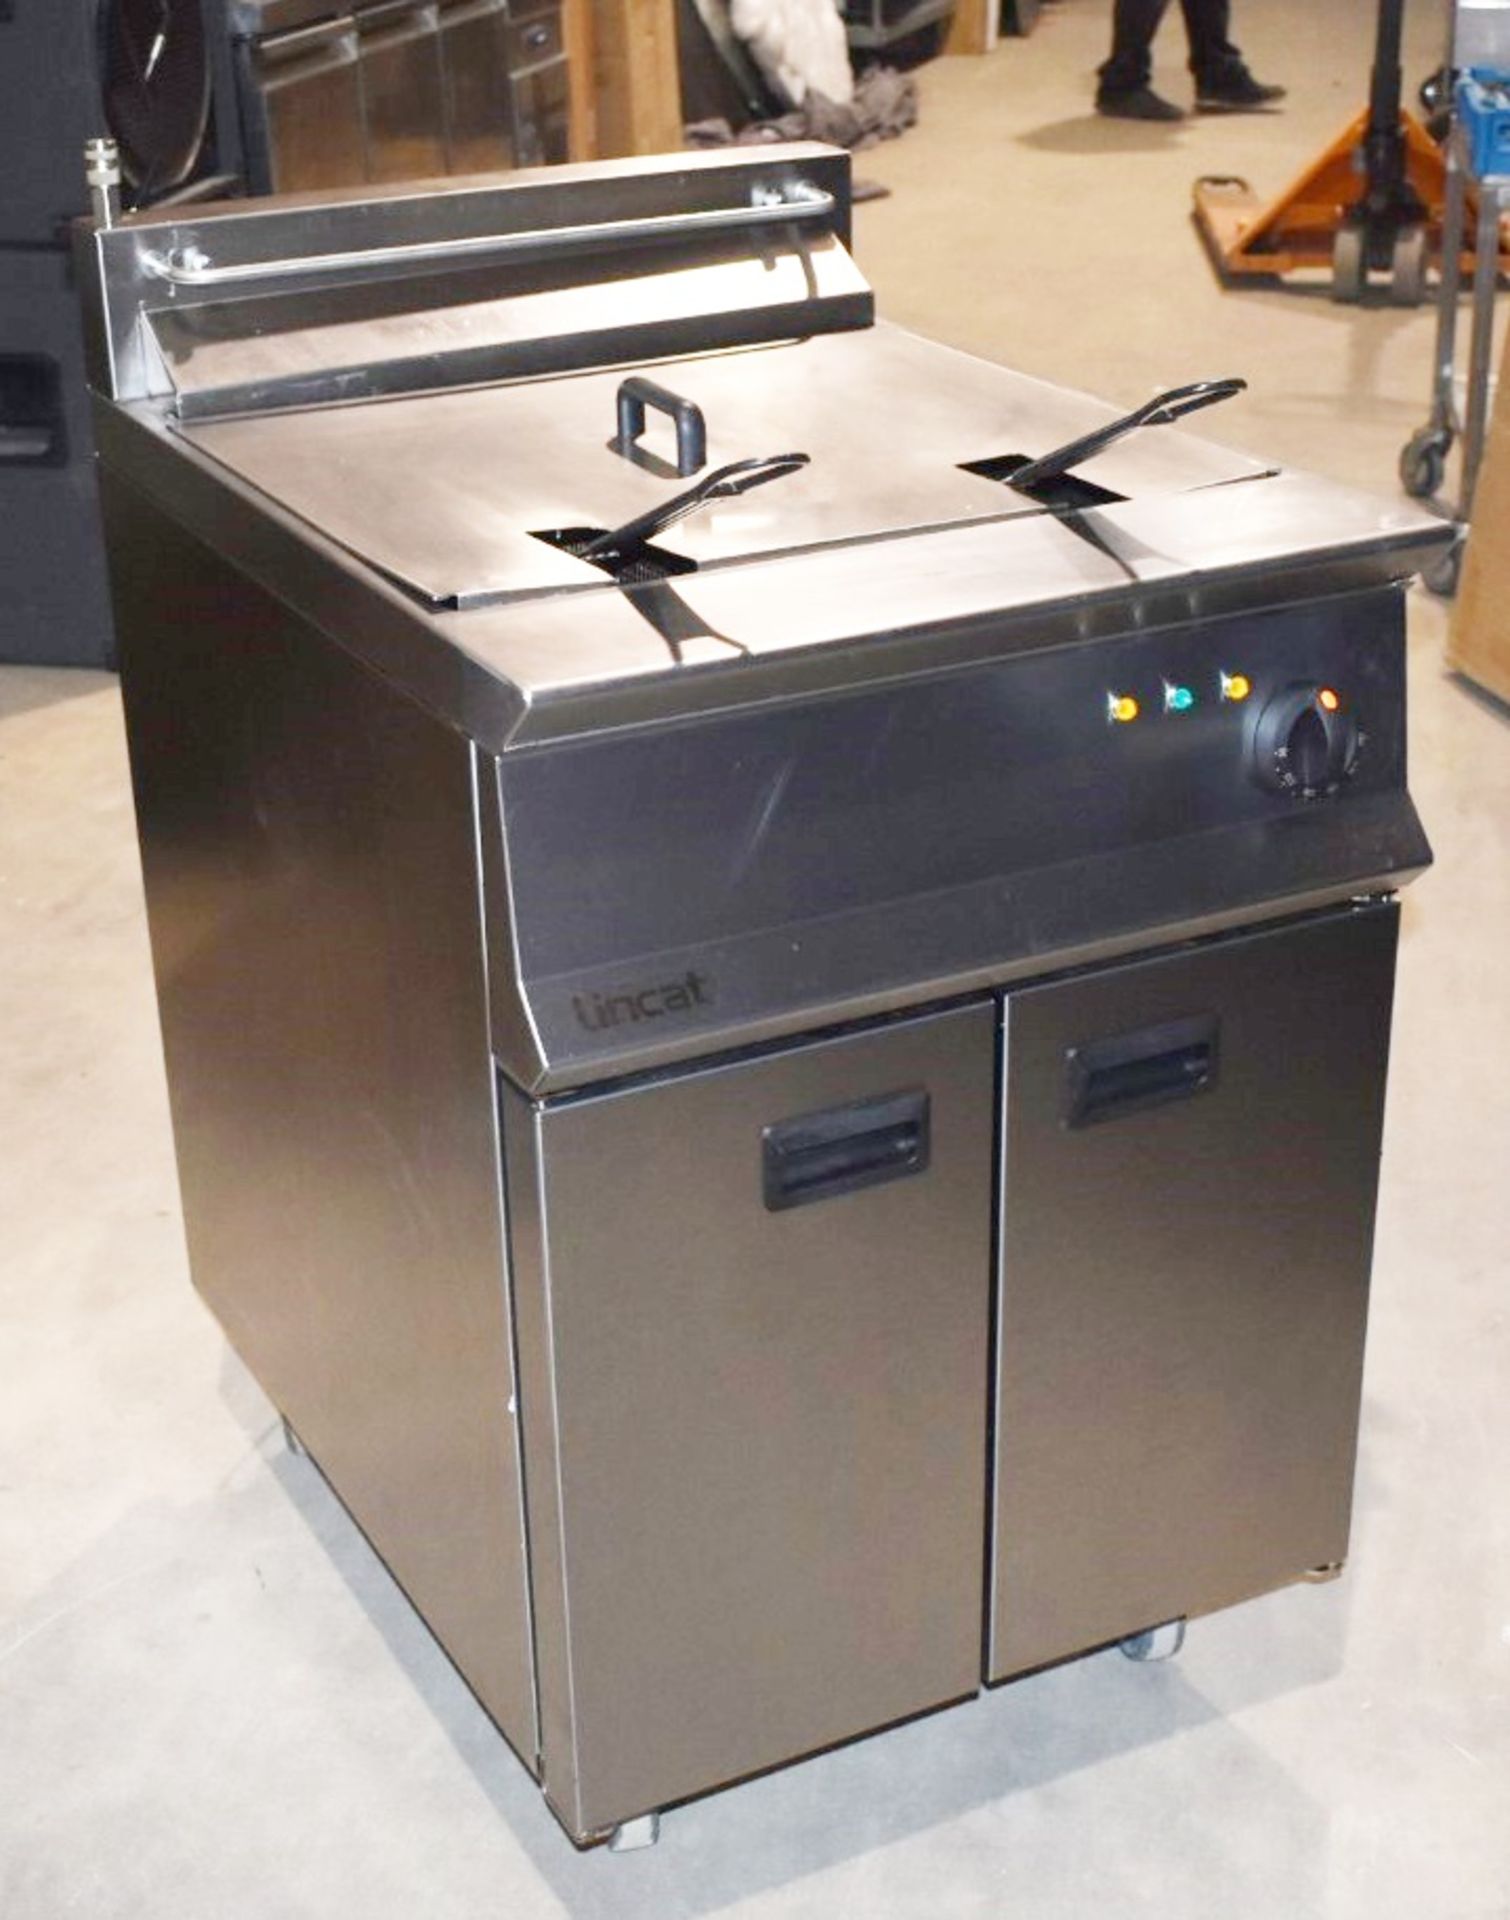 1 x Lincat Opus 800 OE8108 Single Tank Electric Fryer With Filtration - 37L Tank With Two